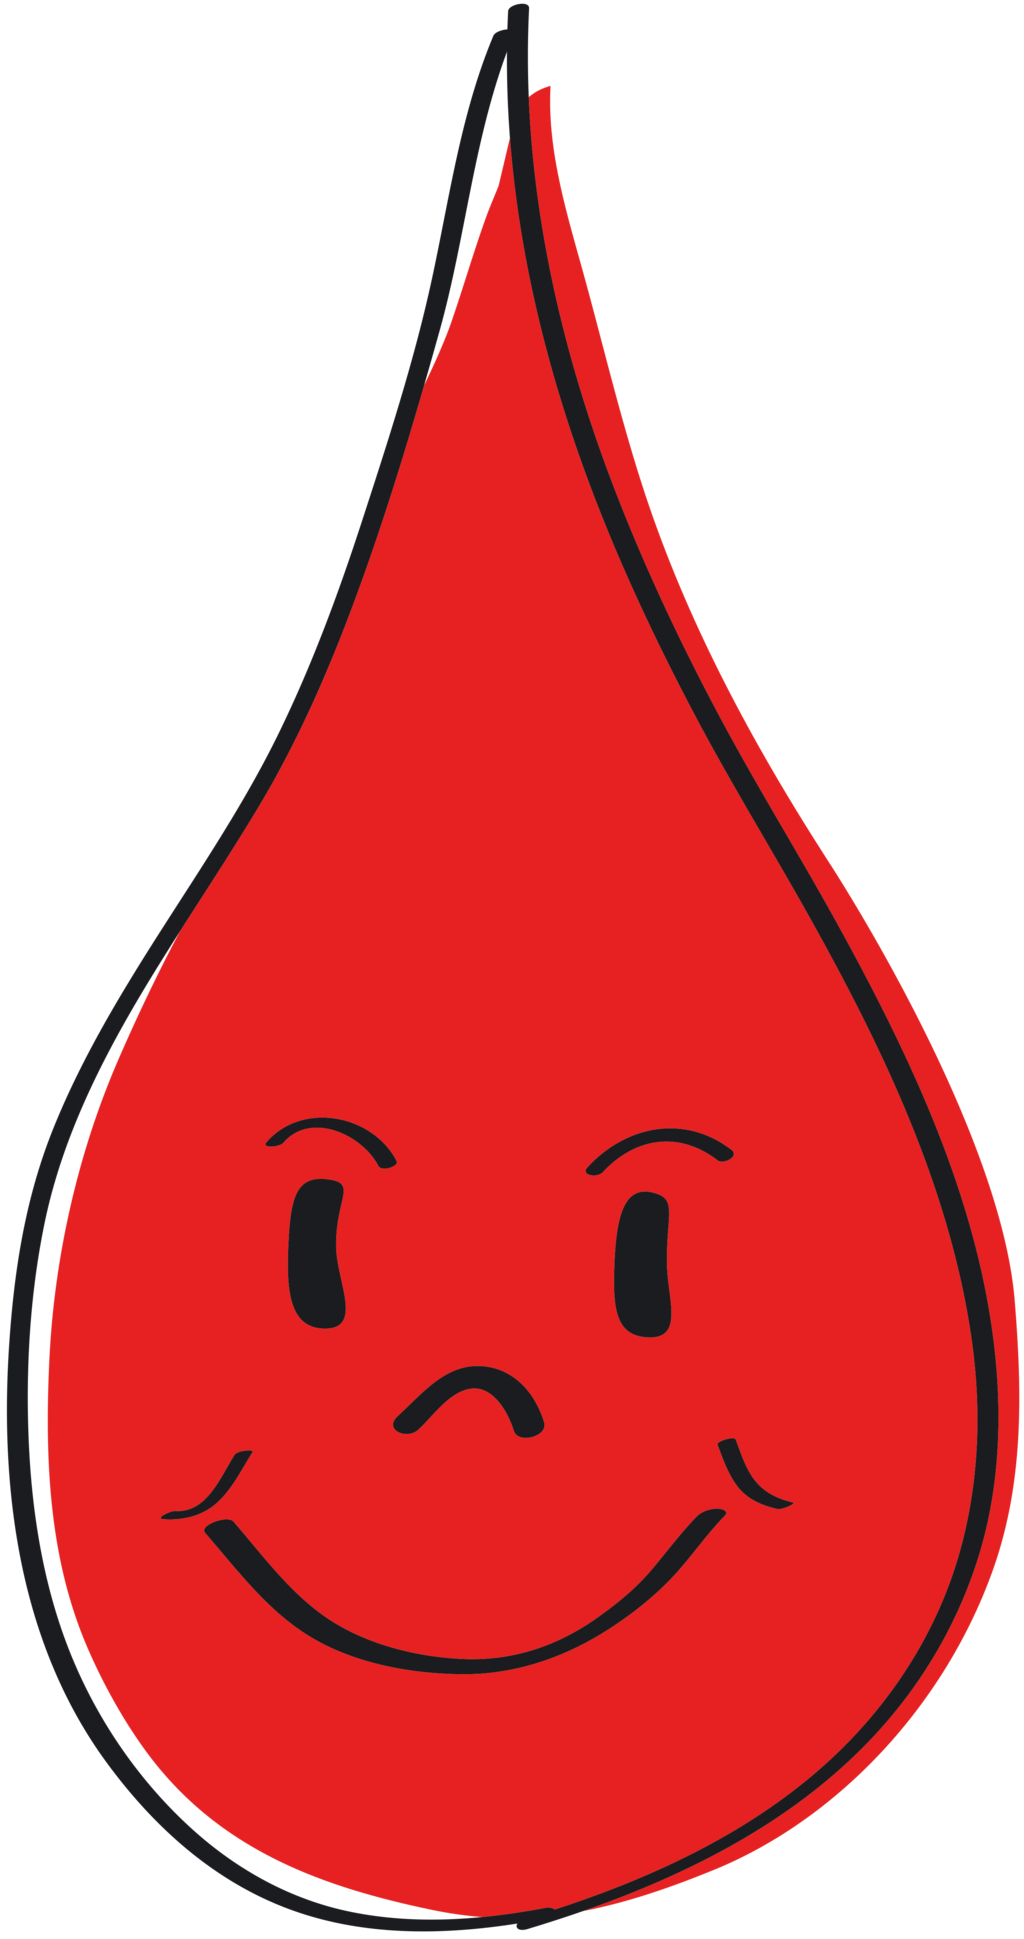 blood clipart picture - photo #31